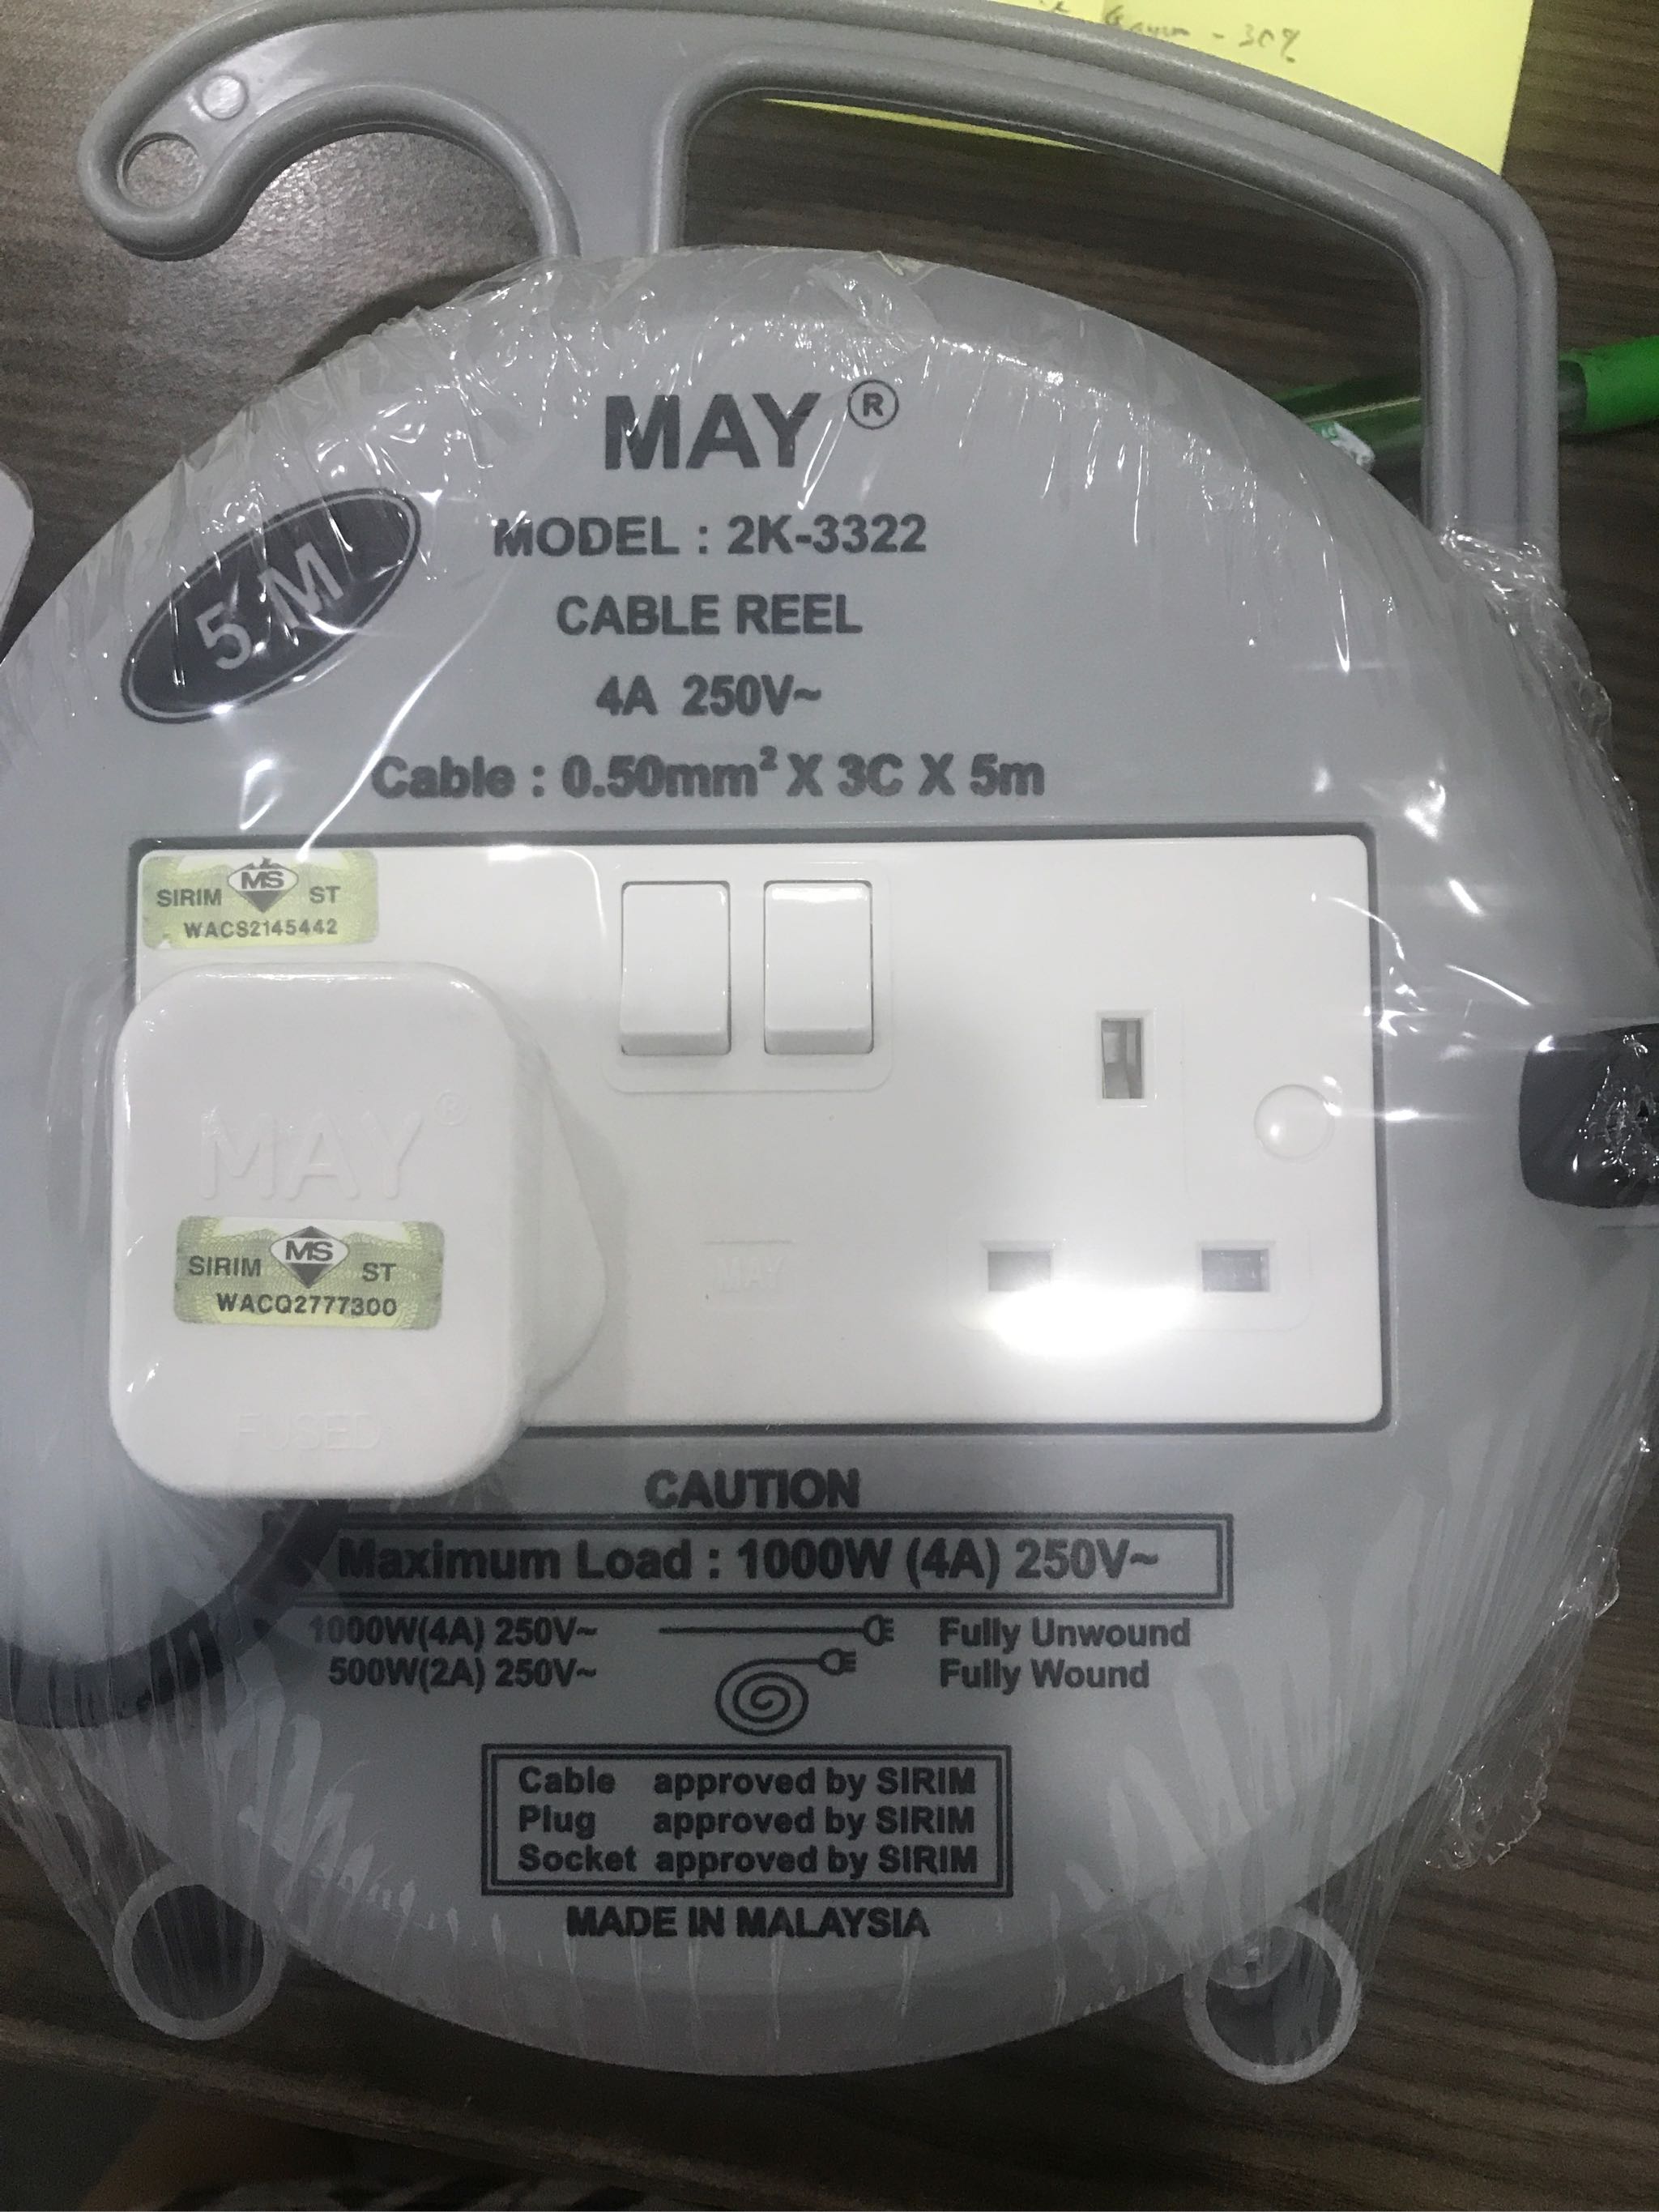 Selamat MAY Heavy Duty Extension Roller 2 Gang Socket Cable Reel